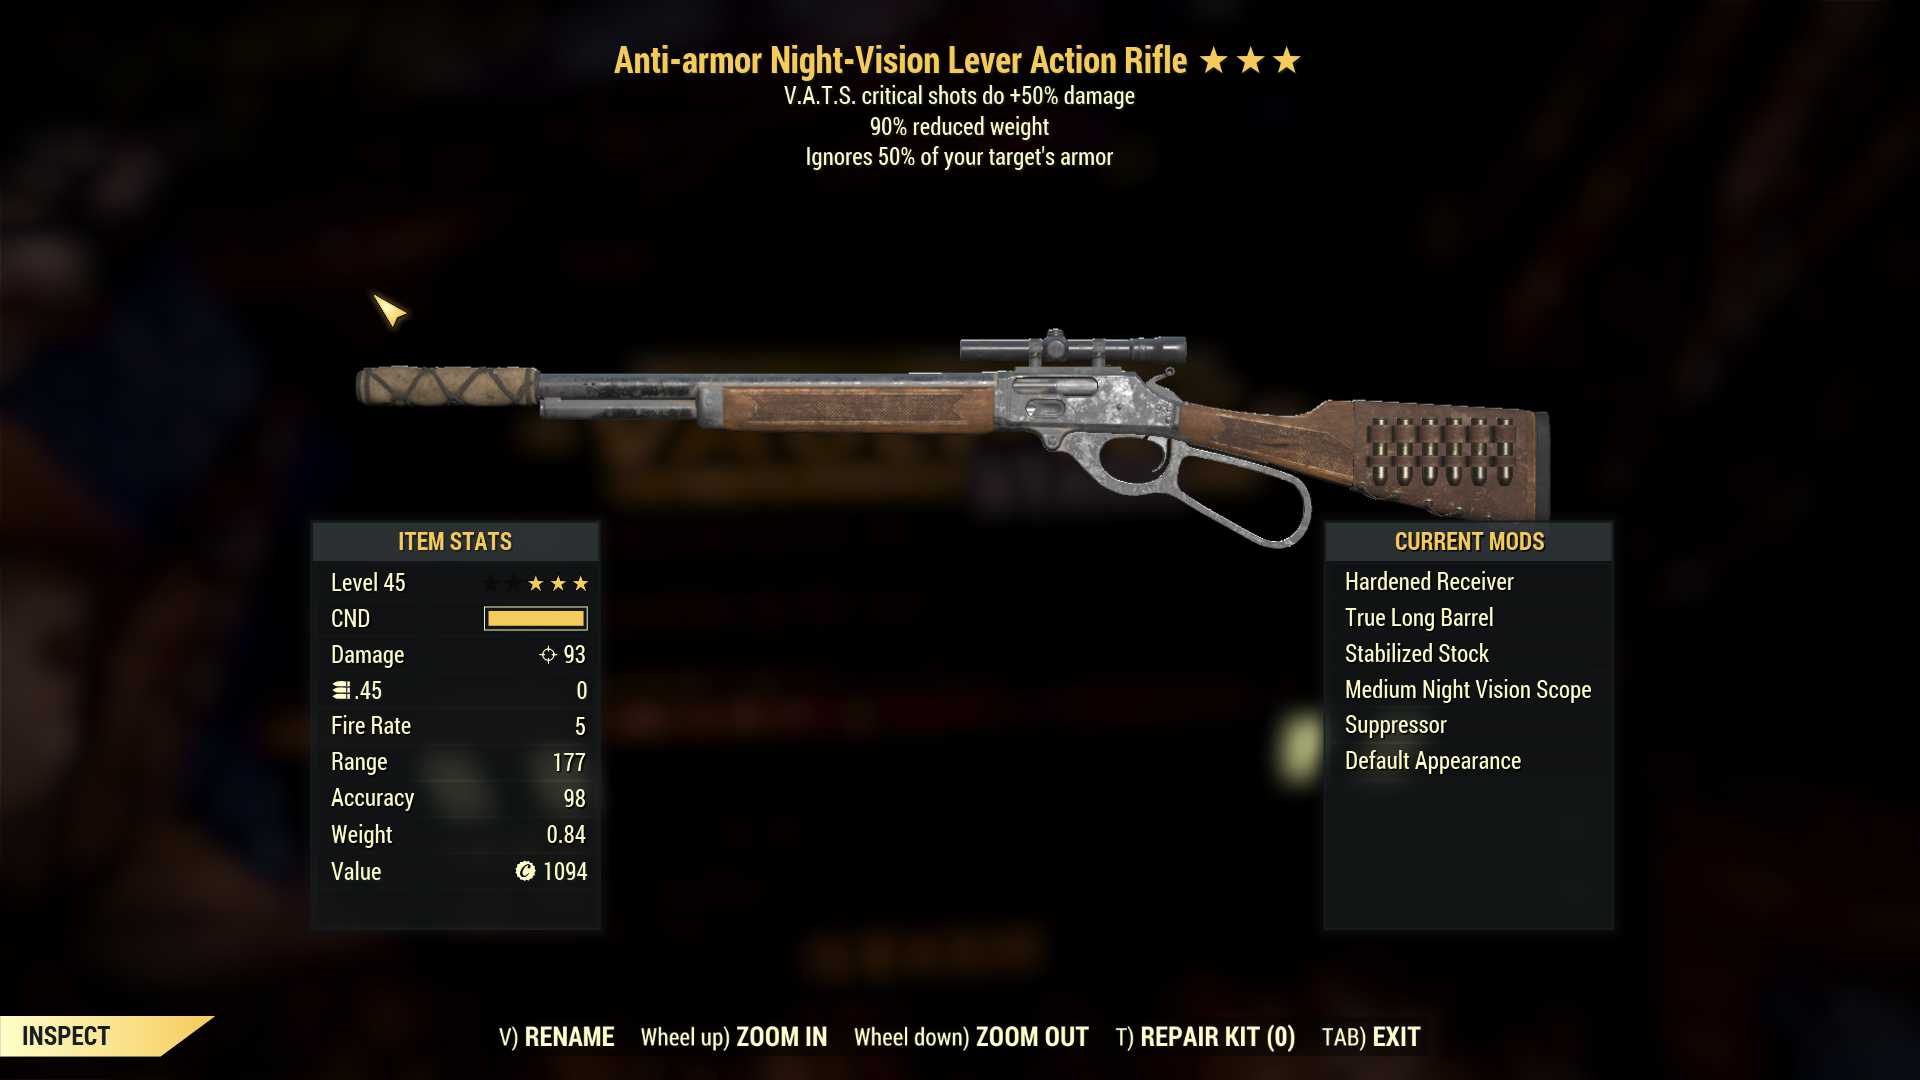 Anti-Armor Lever Action Rifle (+50% critical damage, 90% reduced weight)